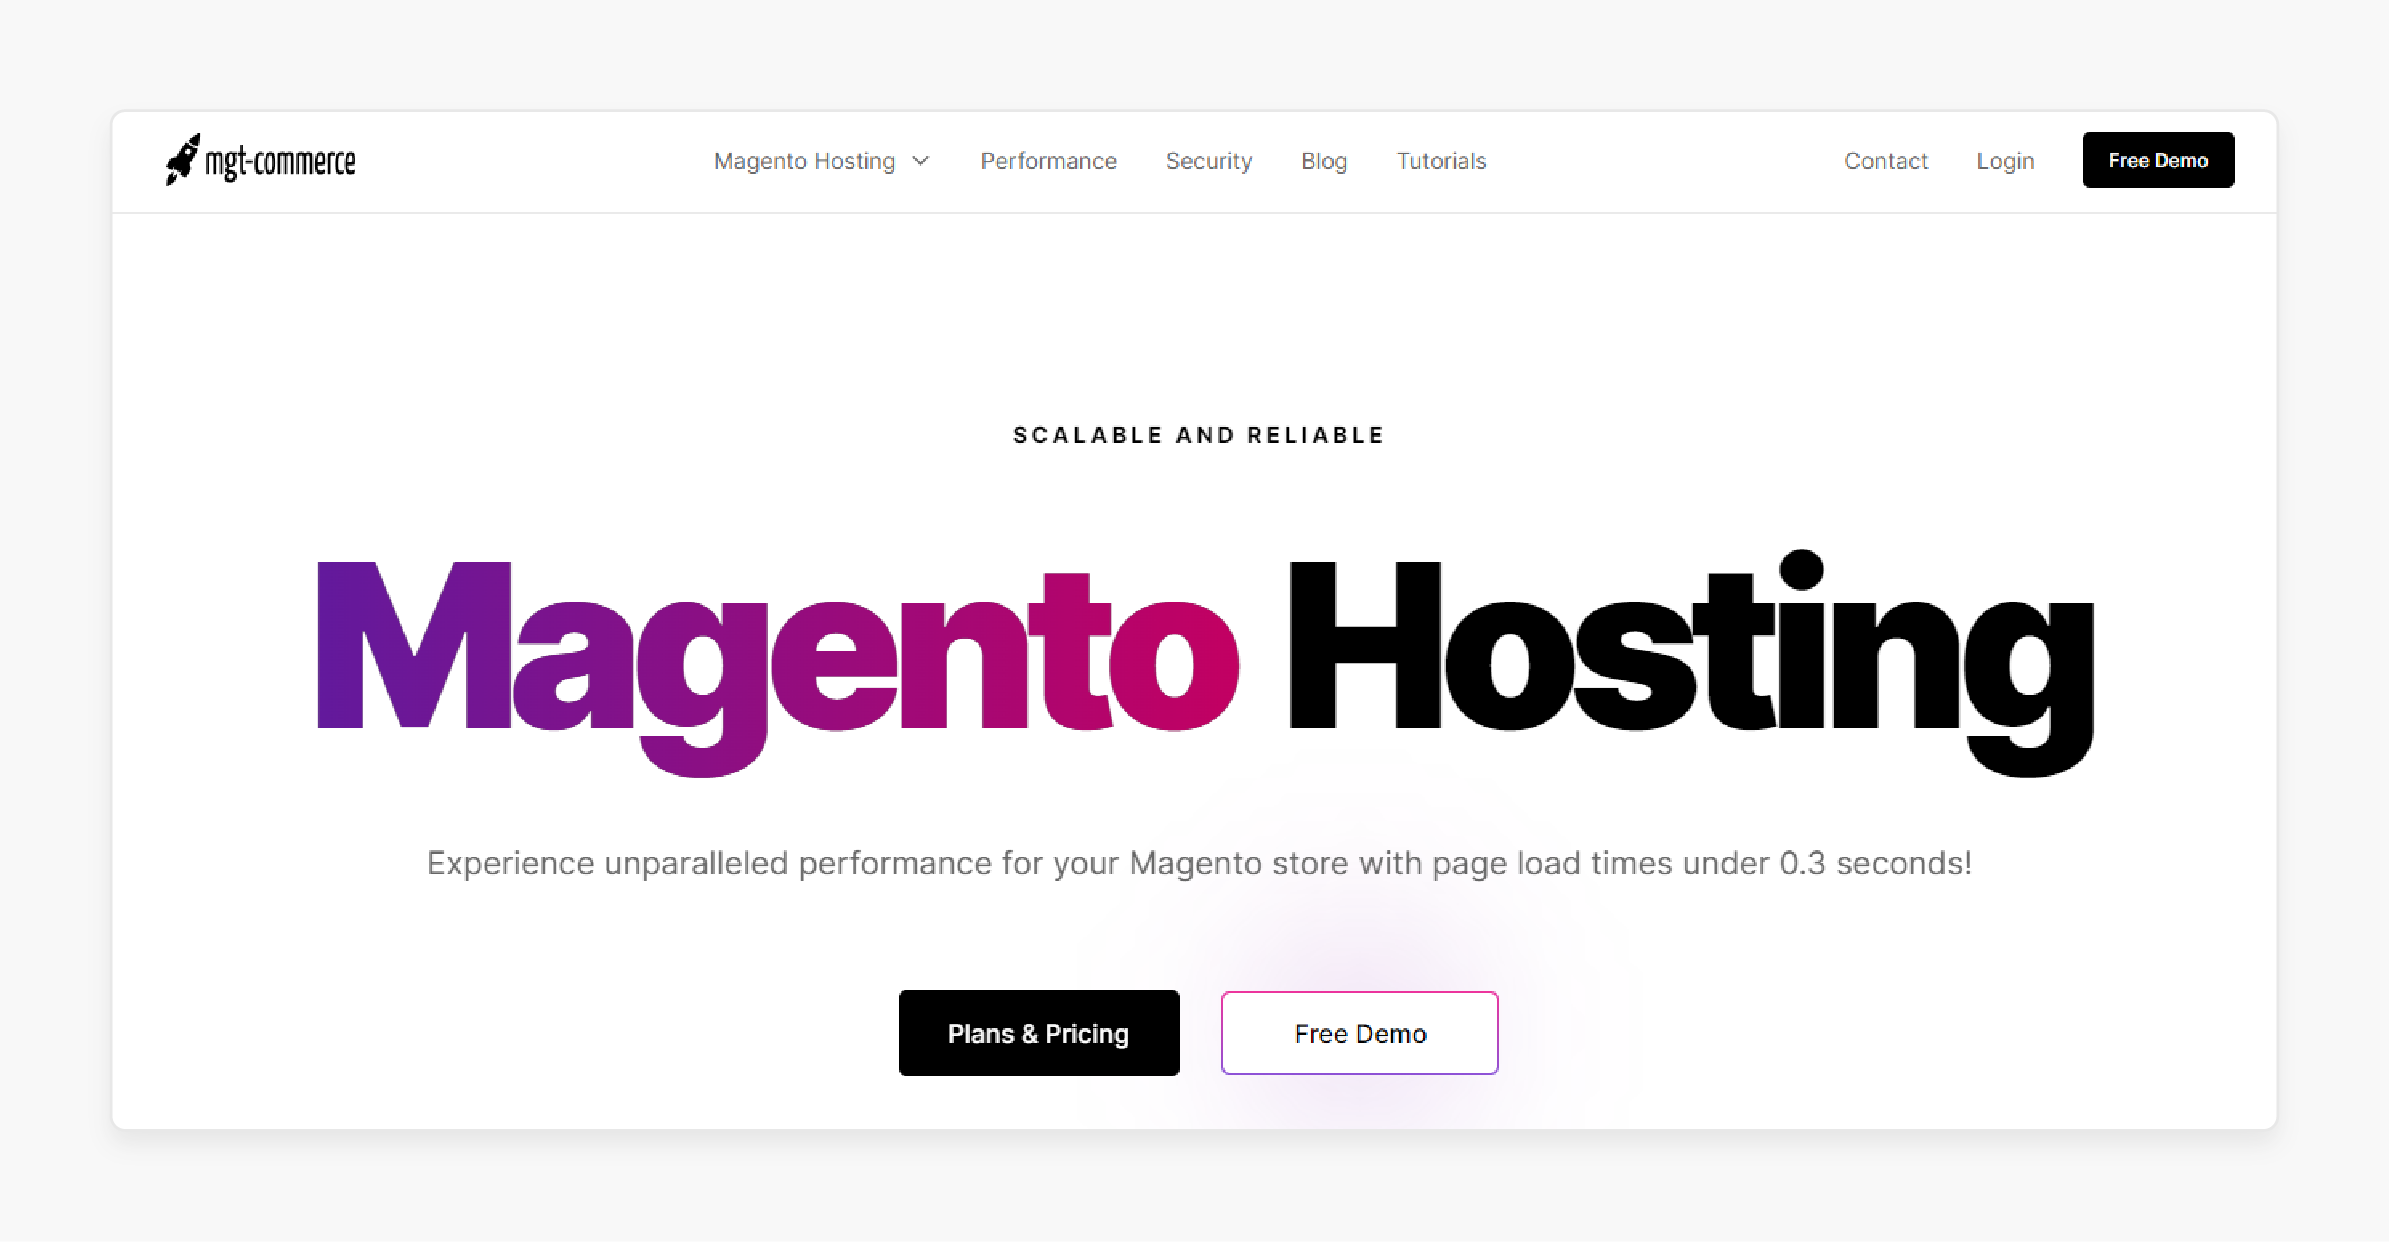 Best Magento Hosting Providers: MGT Commerce